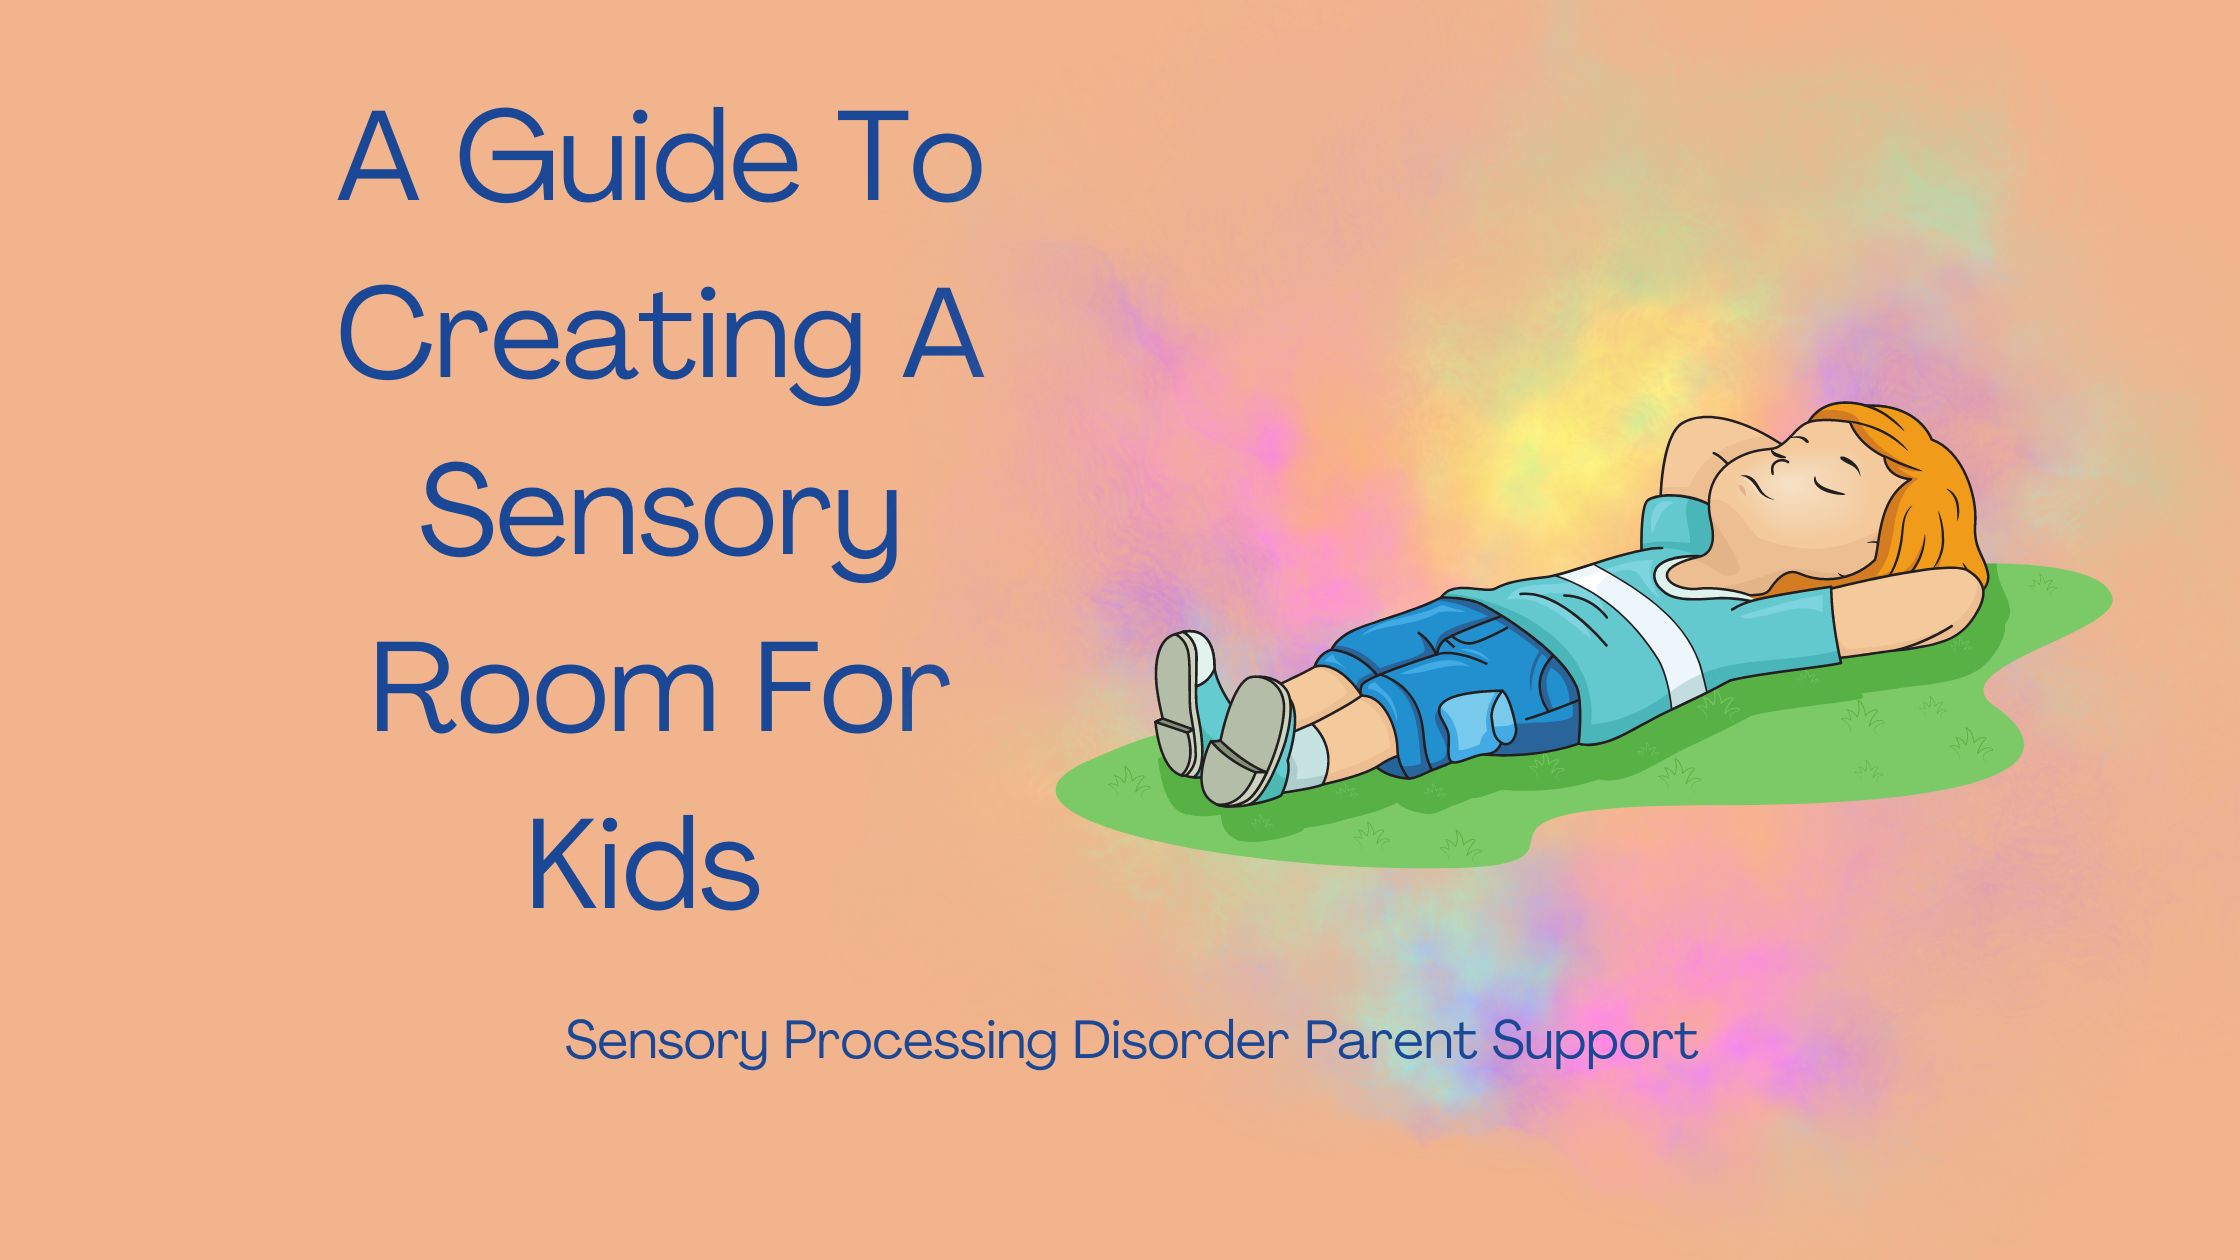 child with sensory processing disorder laying down feeling calm in sensory room A Guide To Creating A Sensory Room For Kids